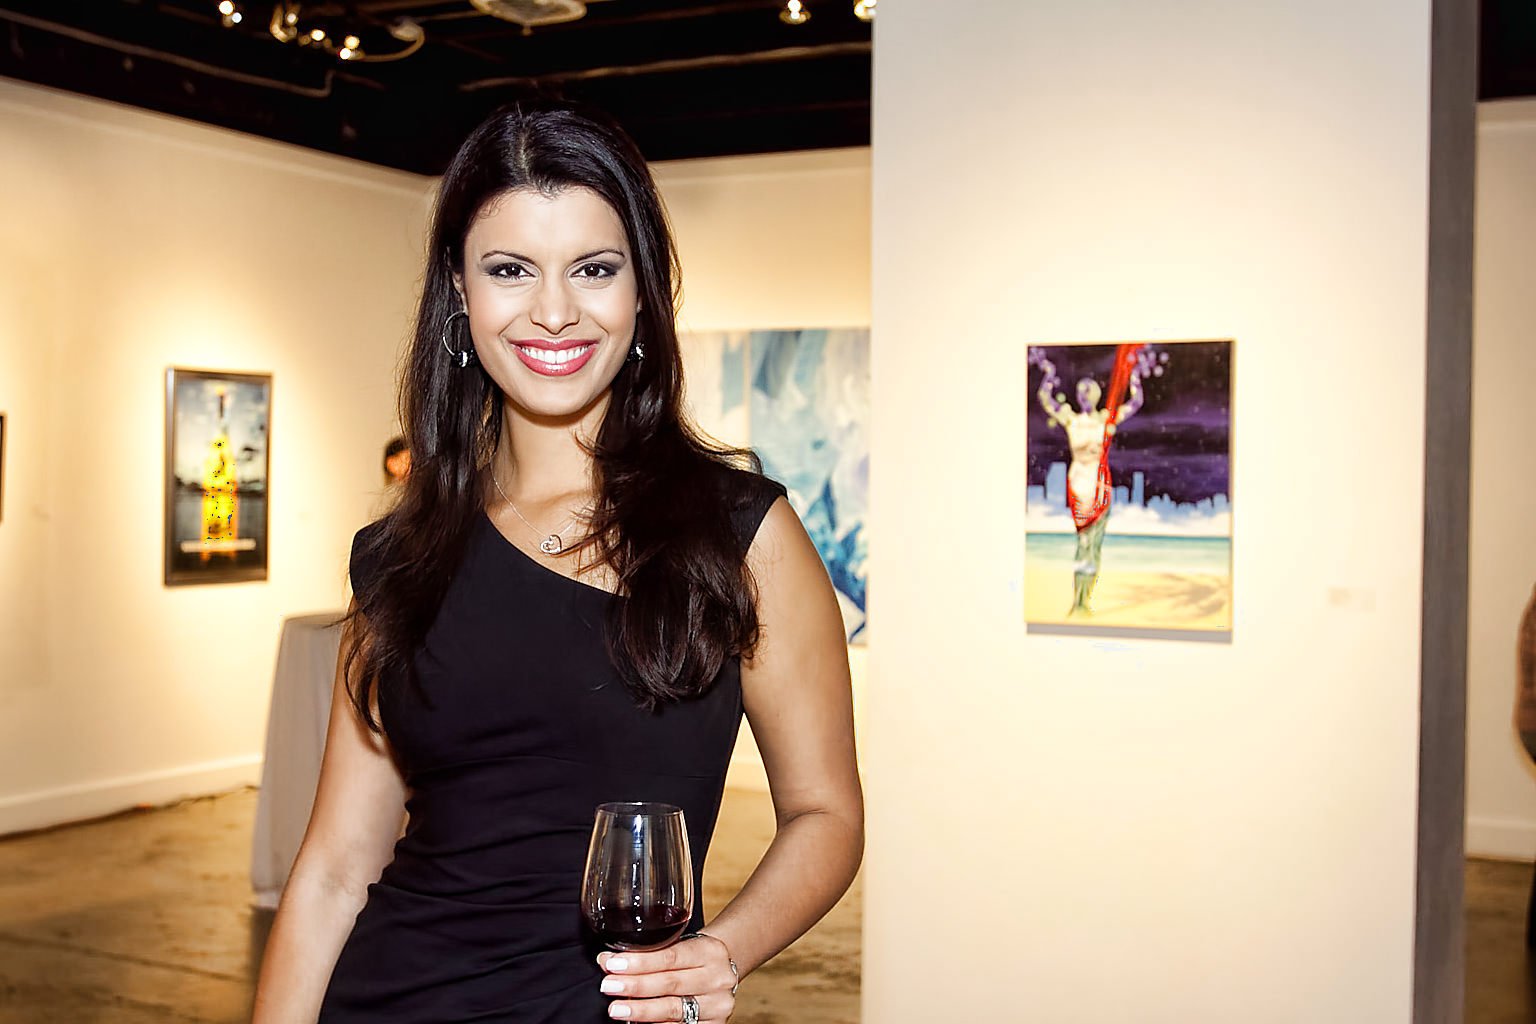 Woman smiling and standing in an art gallery holding a glass of red wine